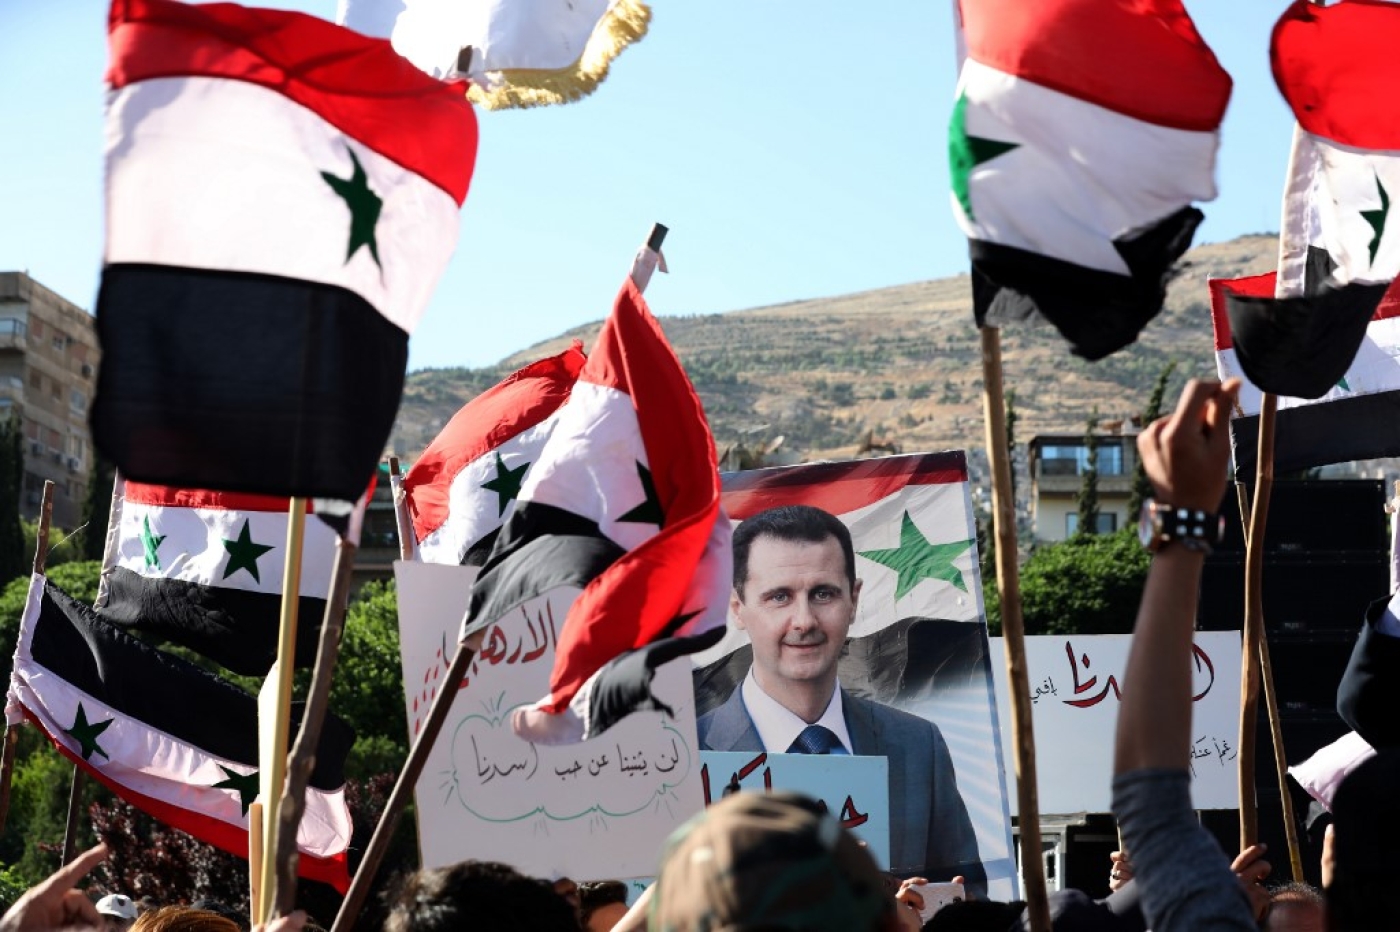 People wave Syrian national flags and pictures of President Bashar al-Assad